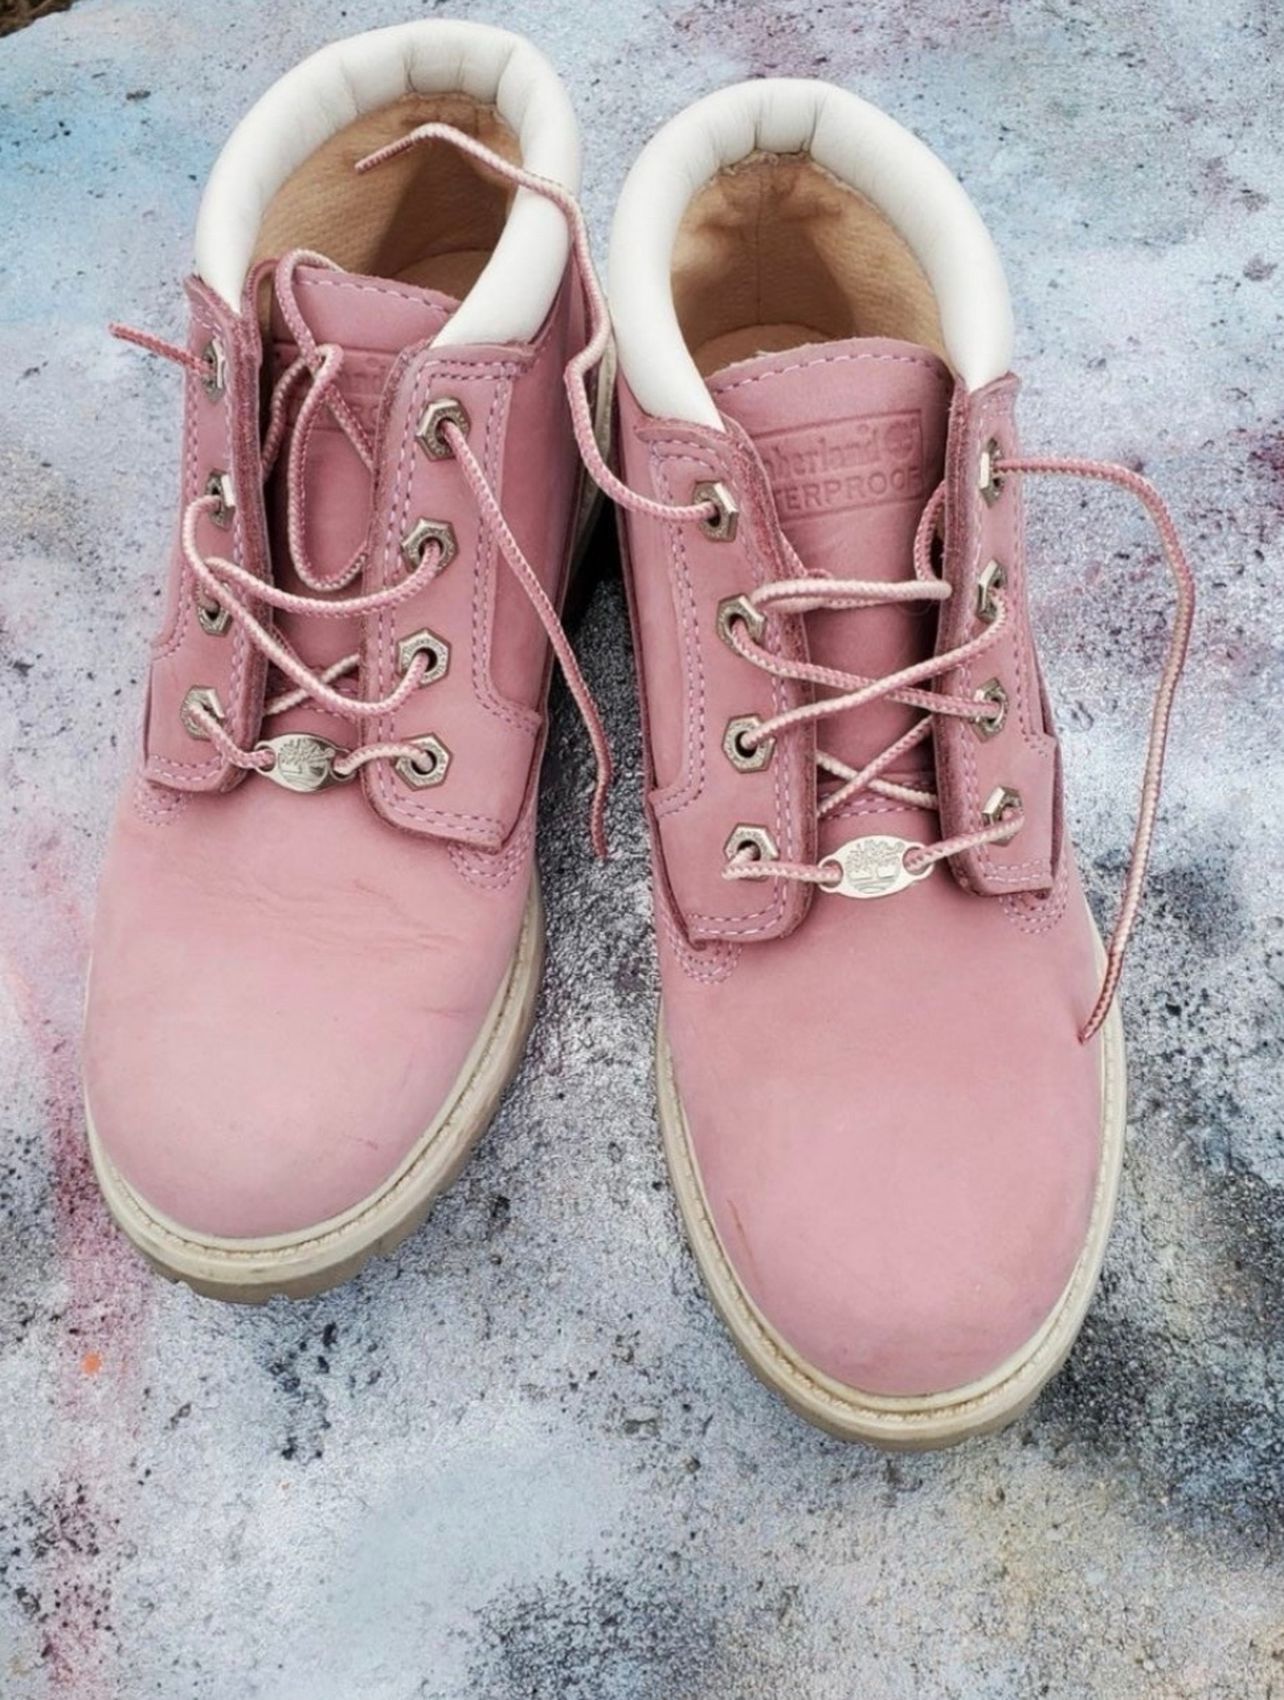 PINK Timberland boots